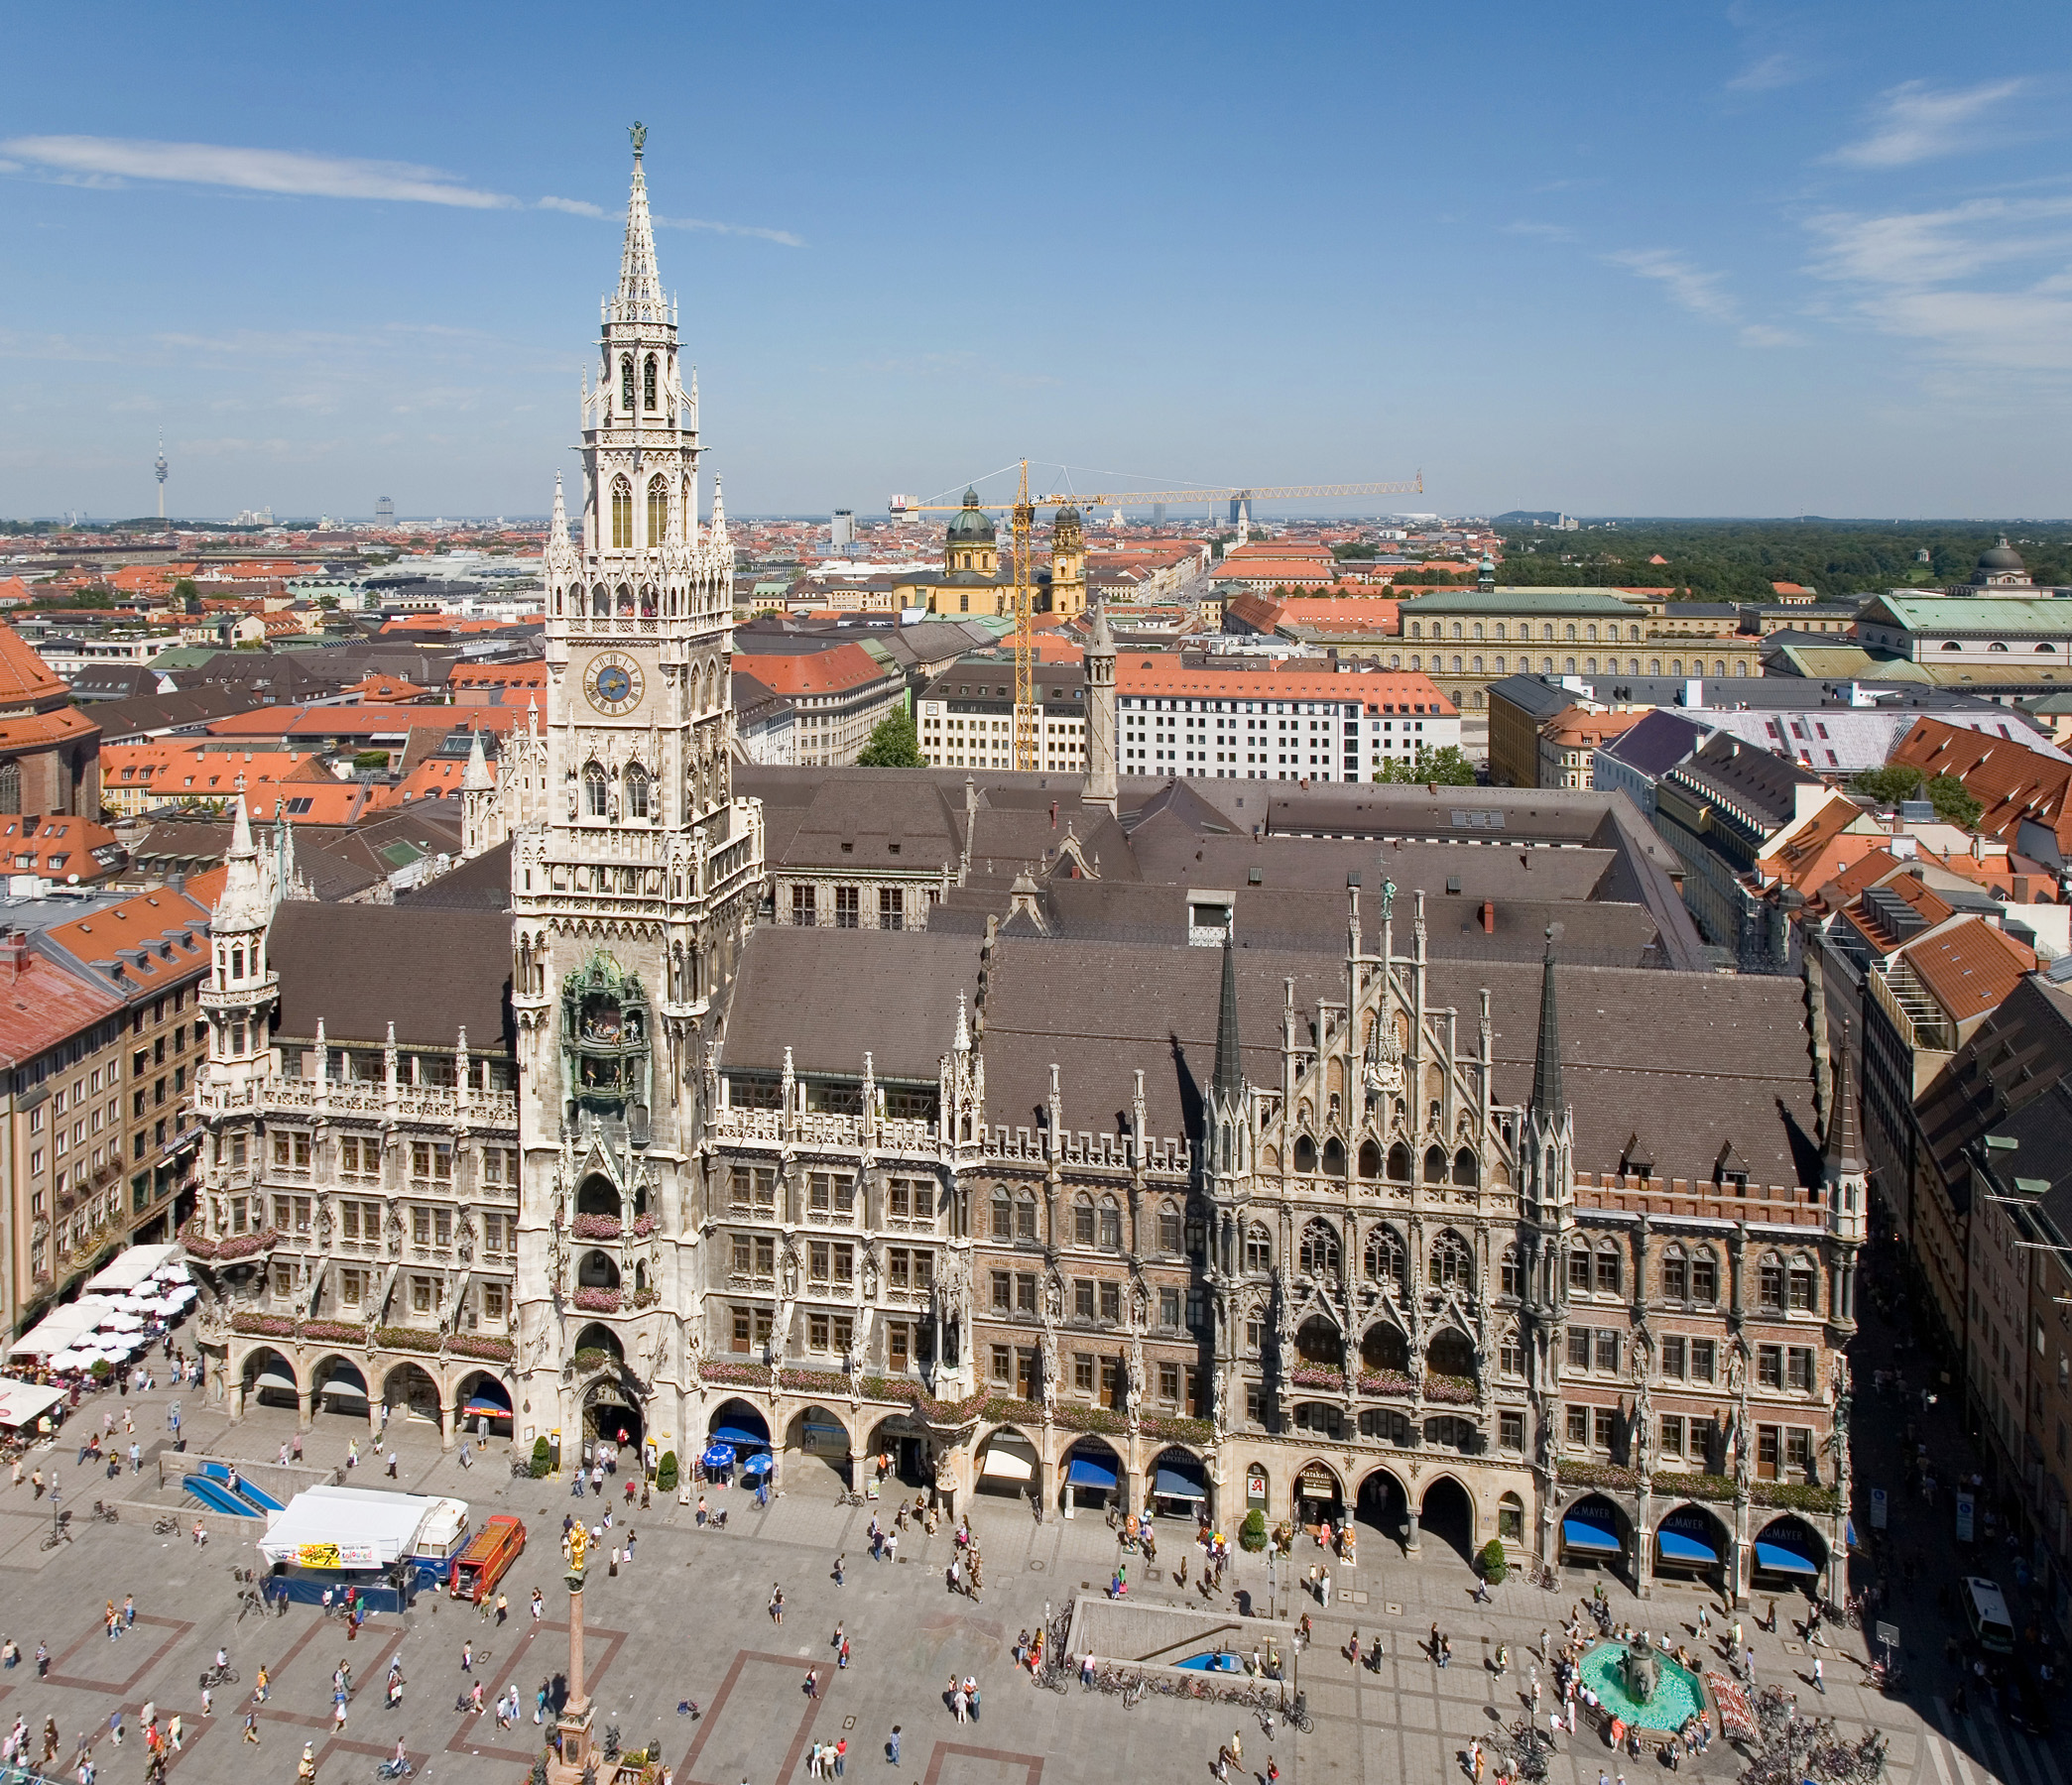 "Rathaus and Marienplatz from Peterskirche - August 2006" by Diliff - Own work. Licensed under CC BY-SA 3.0 via Wikimedia Commons - https://commons.wikimedia.org/wiki/File:Rathaus_and_Marienplatz_from_Peterskirche_-_August_2006.jpg#/media/File:Rathaus_and_Marienplatz_from_Peterskirche_-_August_2006.jpg